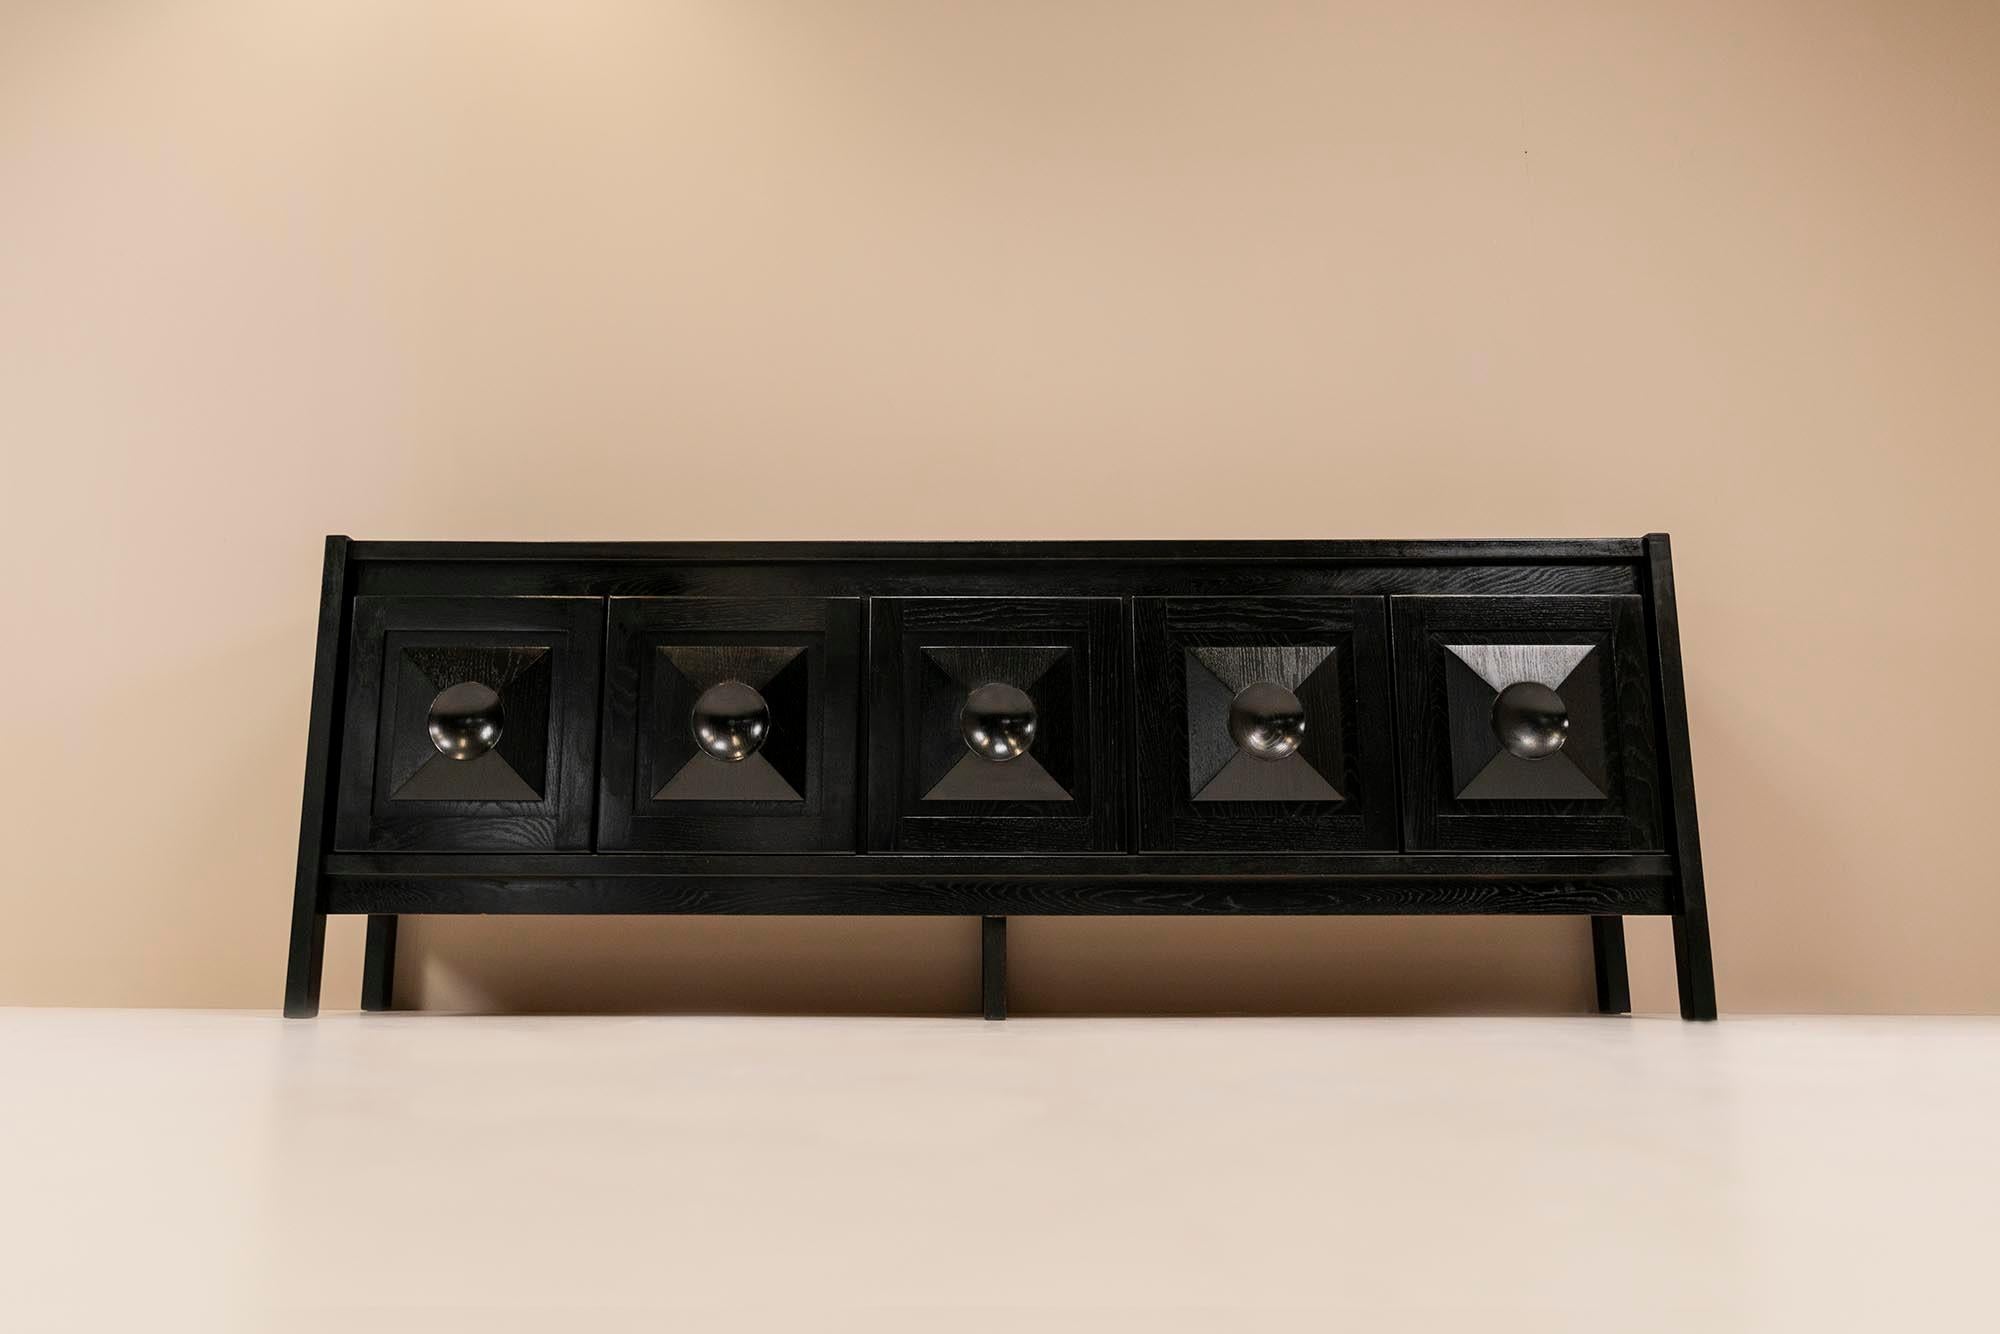 A beautiful brutalist sideboard in the style of De Coene from the 1970s. This item is made of black-stained solid oak and has five doors. These doors have a nice thickness and carry a three-dimensional pattern on the front. They open and close